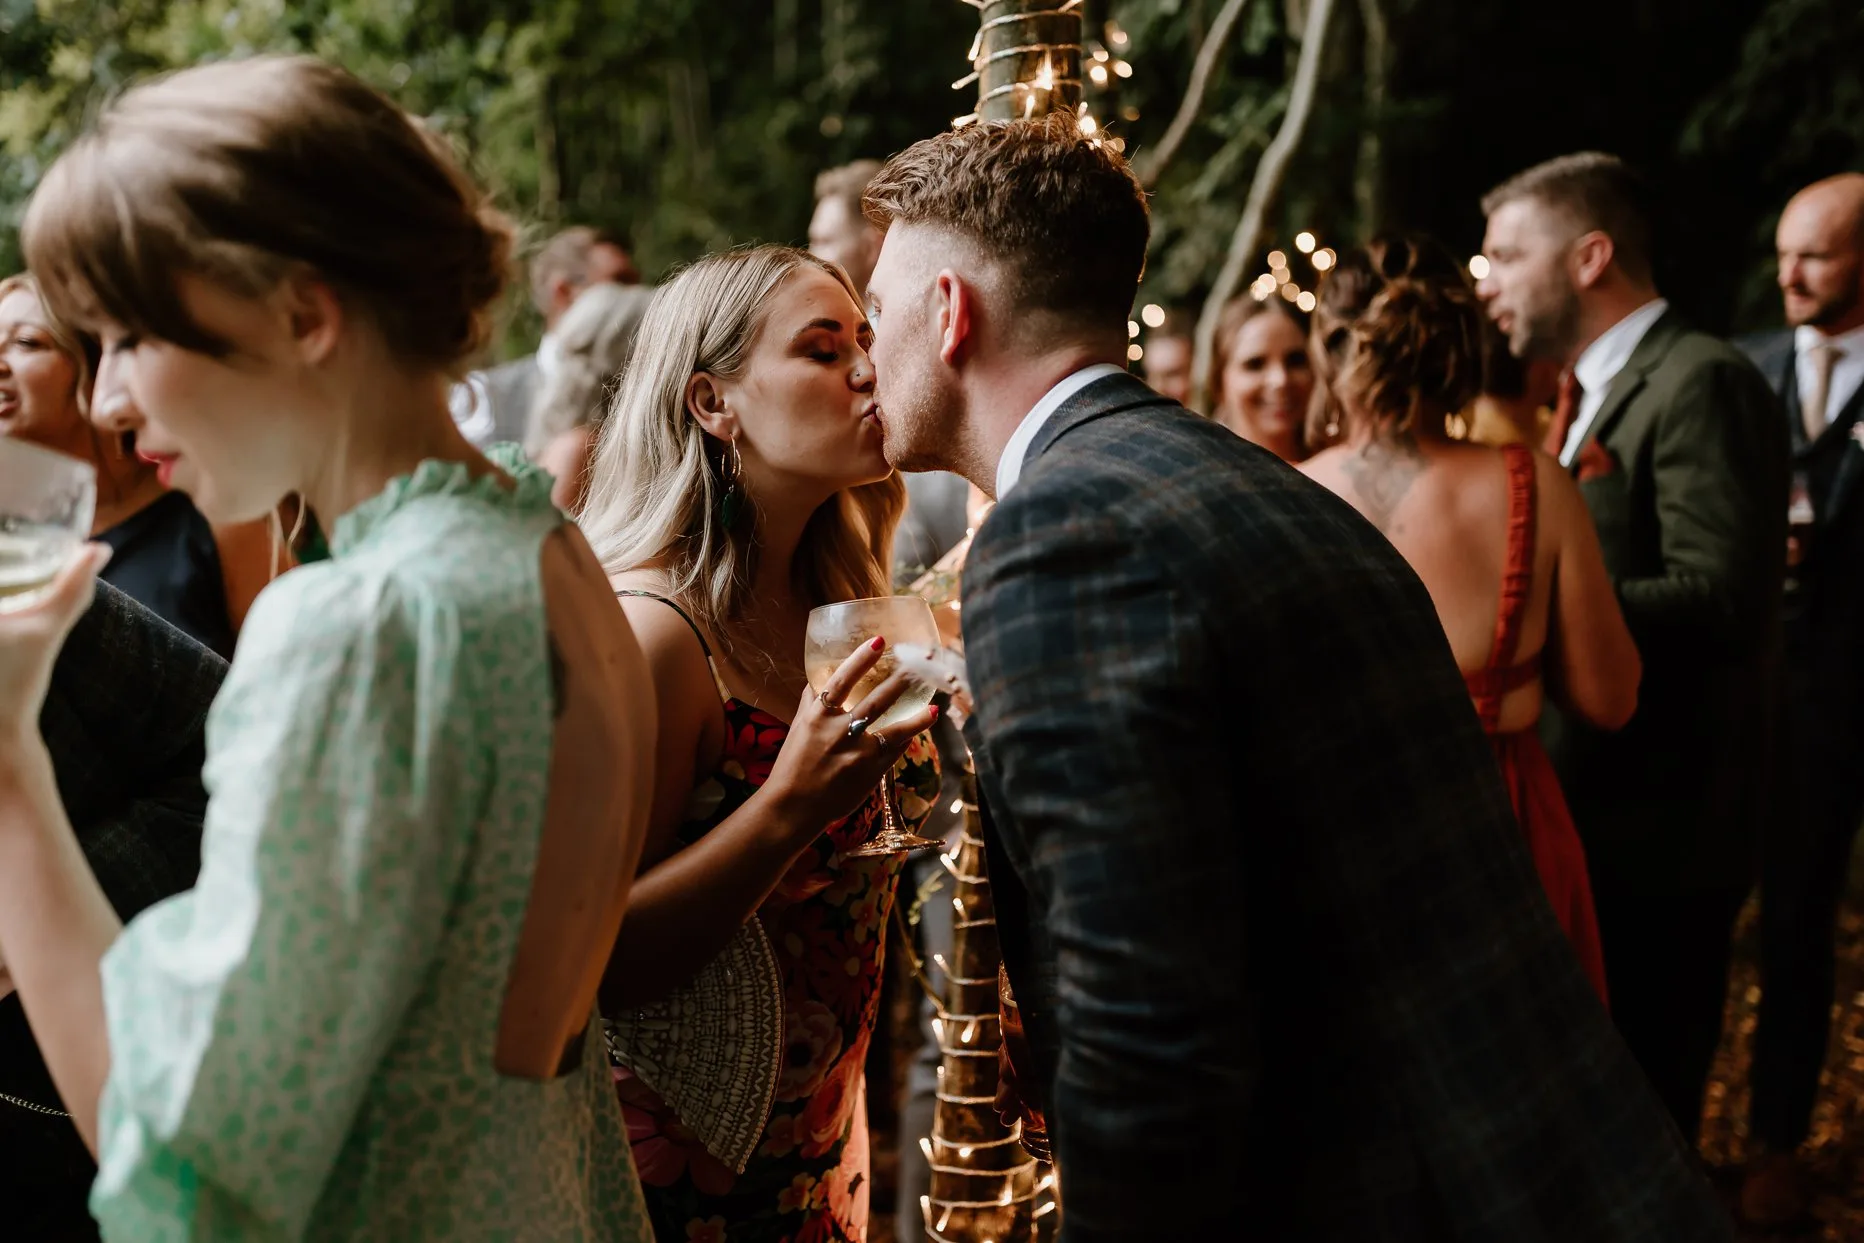 Two wedding guests share a kiss during the dancing at Oaklands Grand Lodge.